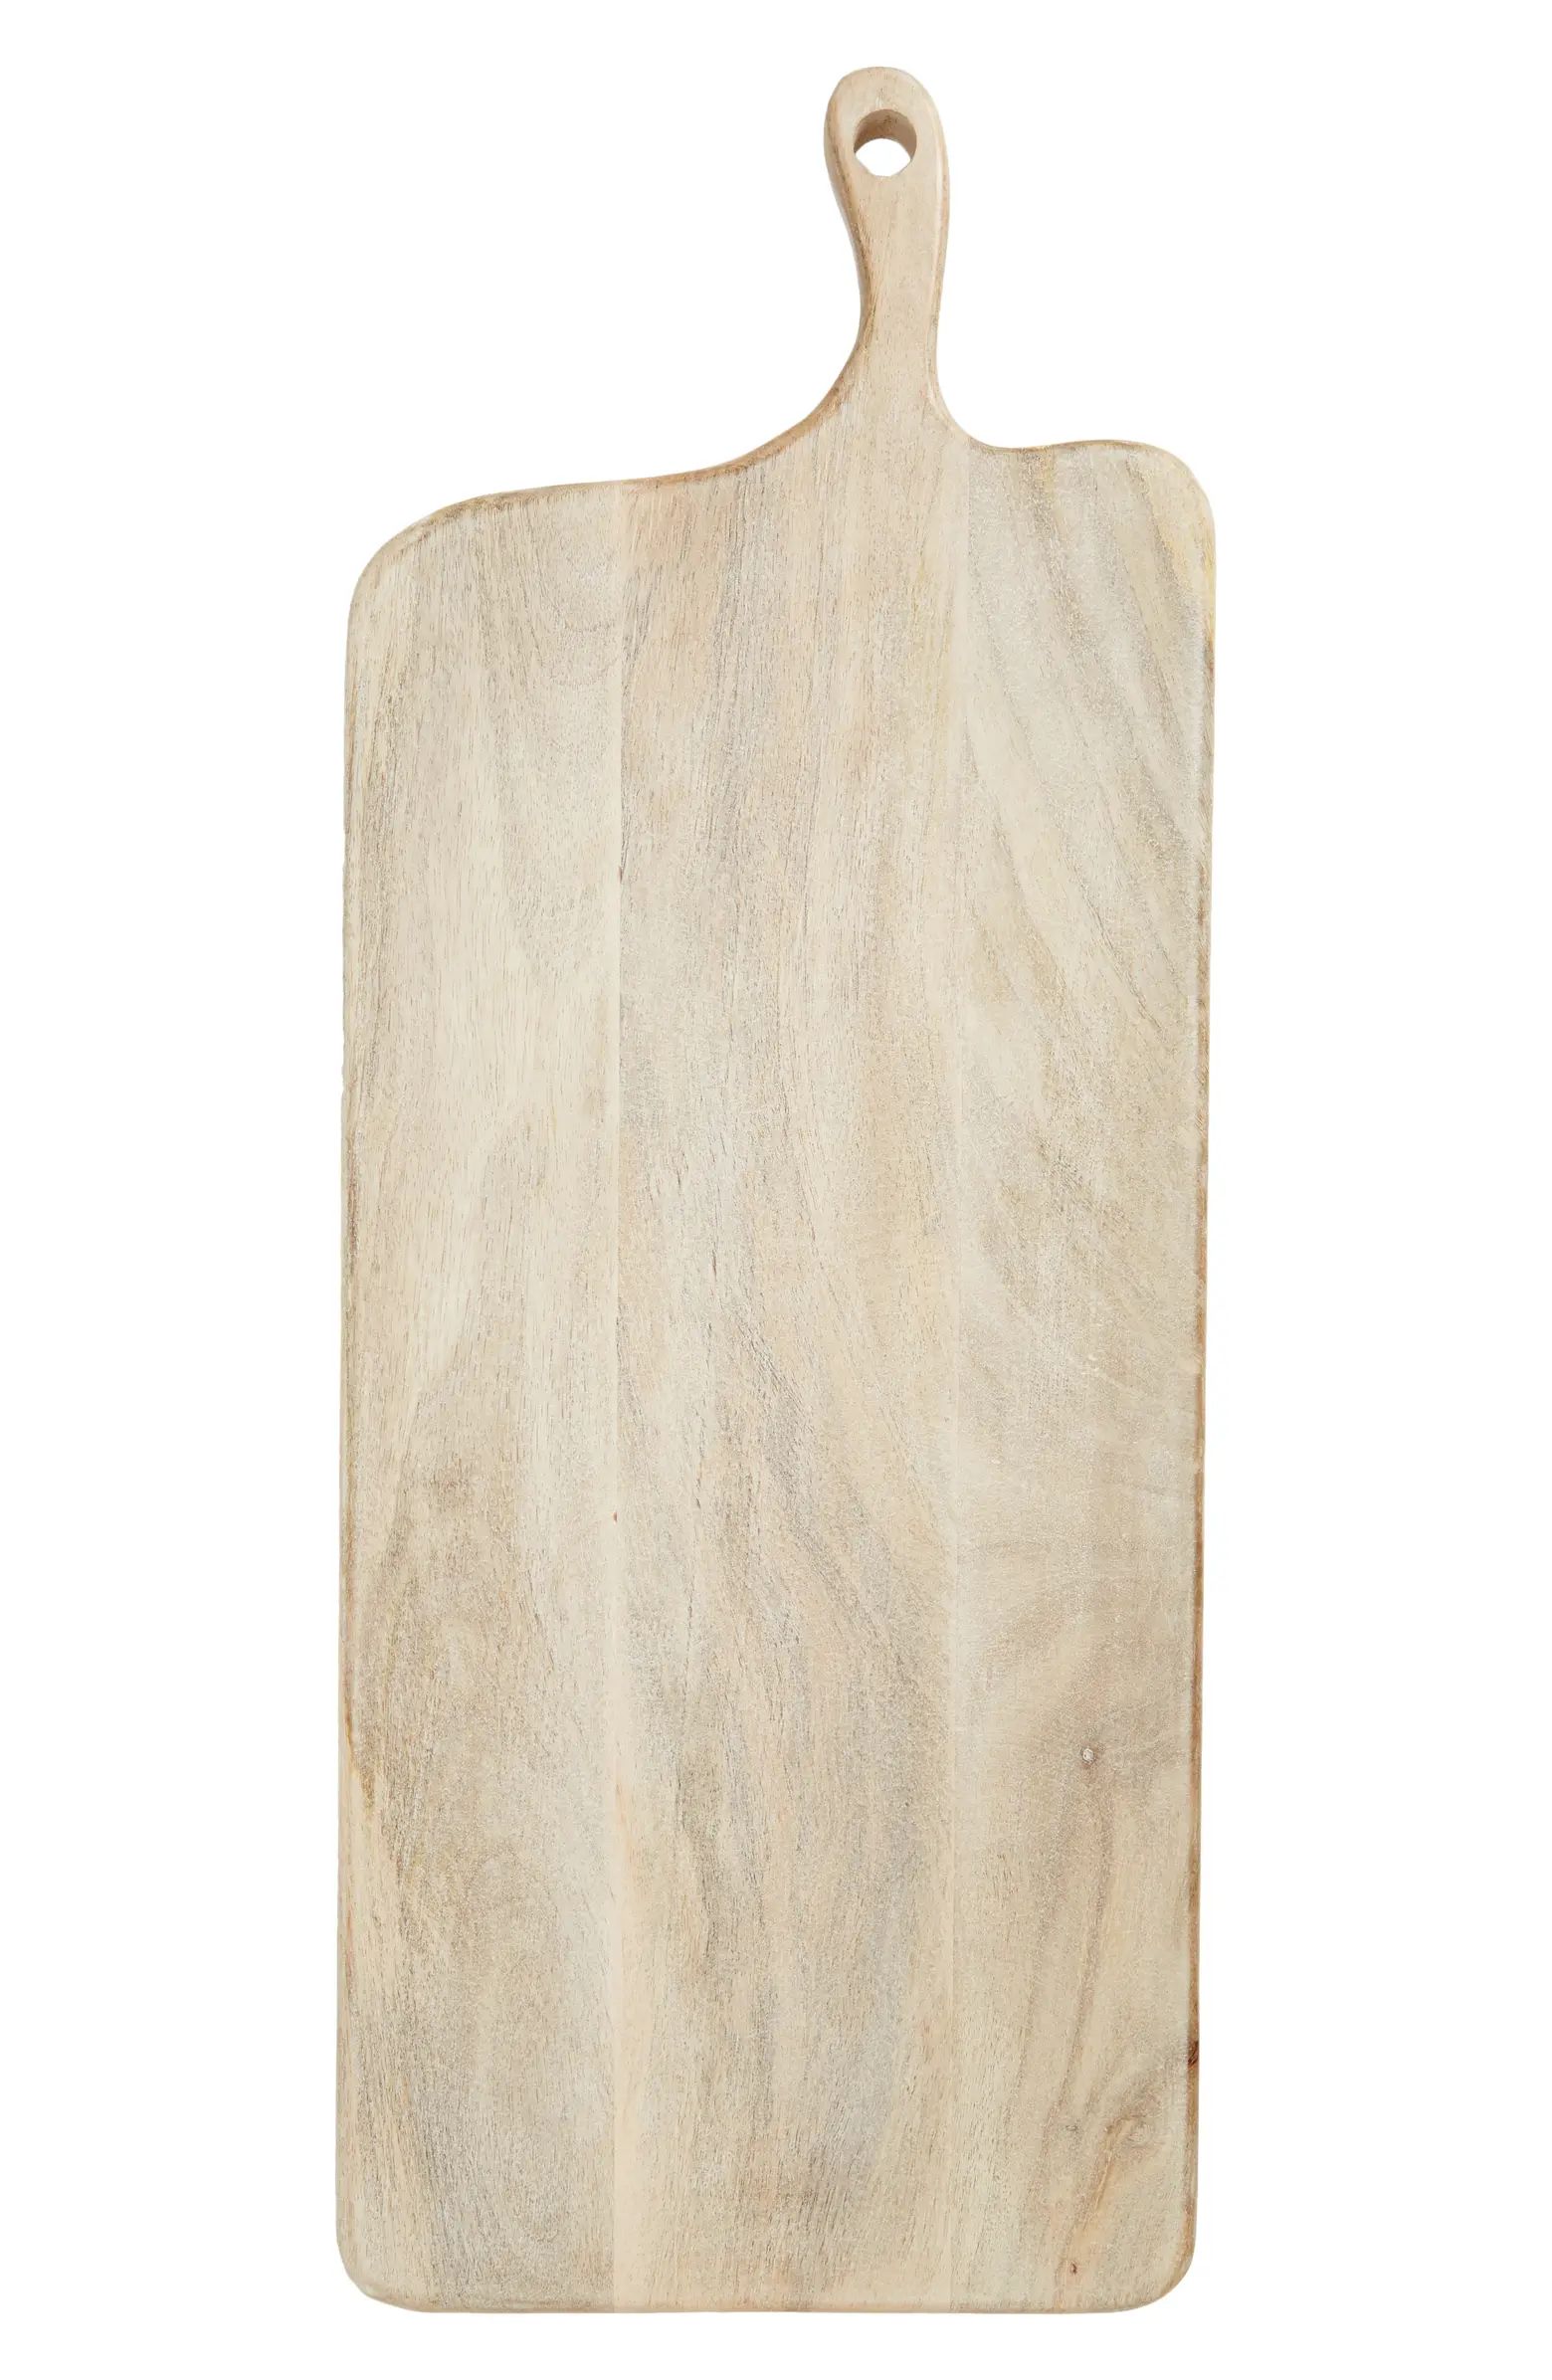 Nordstrom Extra Large Wood Cheese Board | Nordstrom | Nordstrom